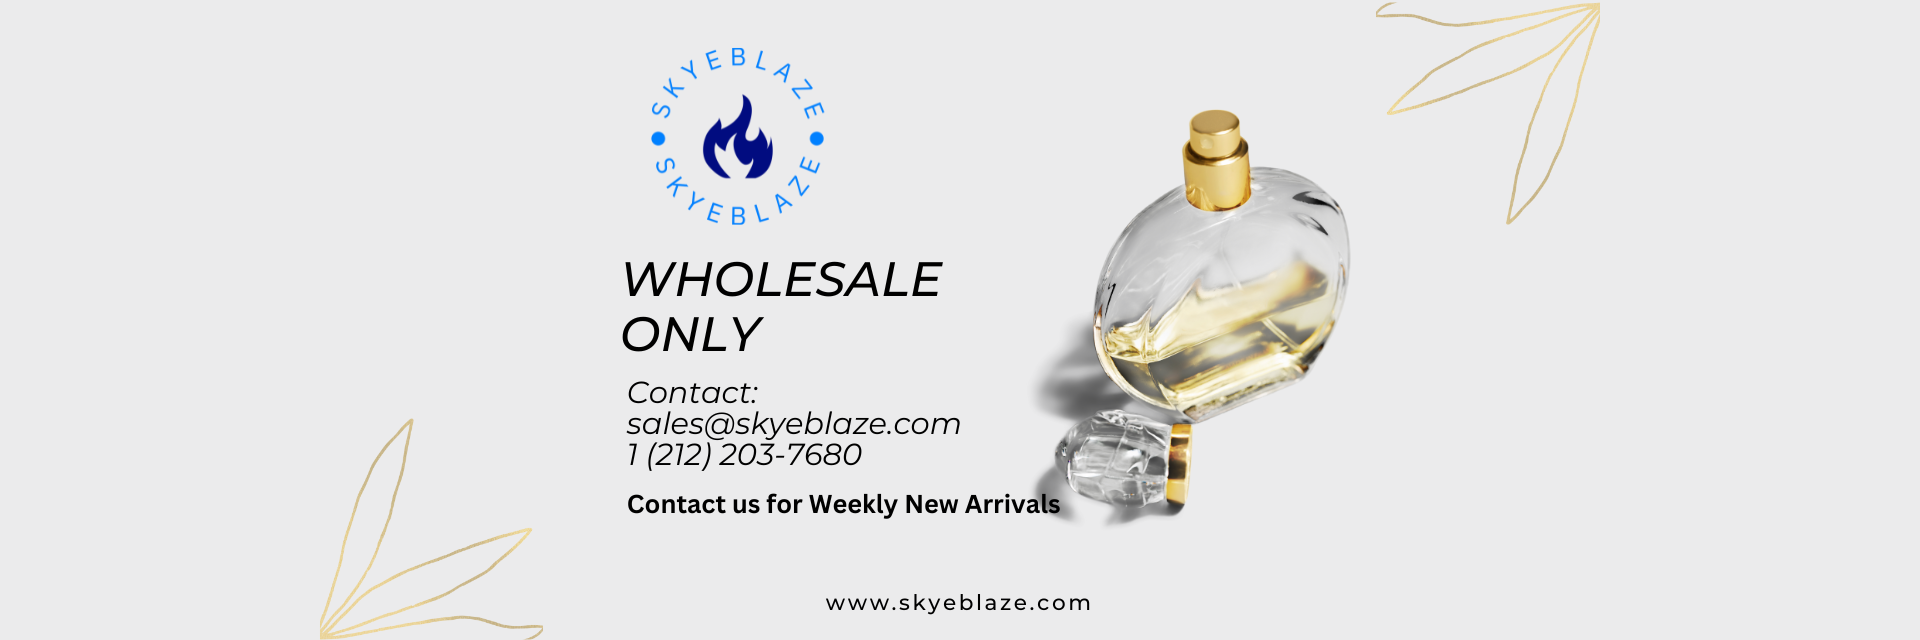 Wholesale Only (2)